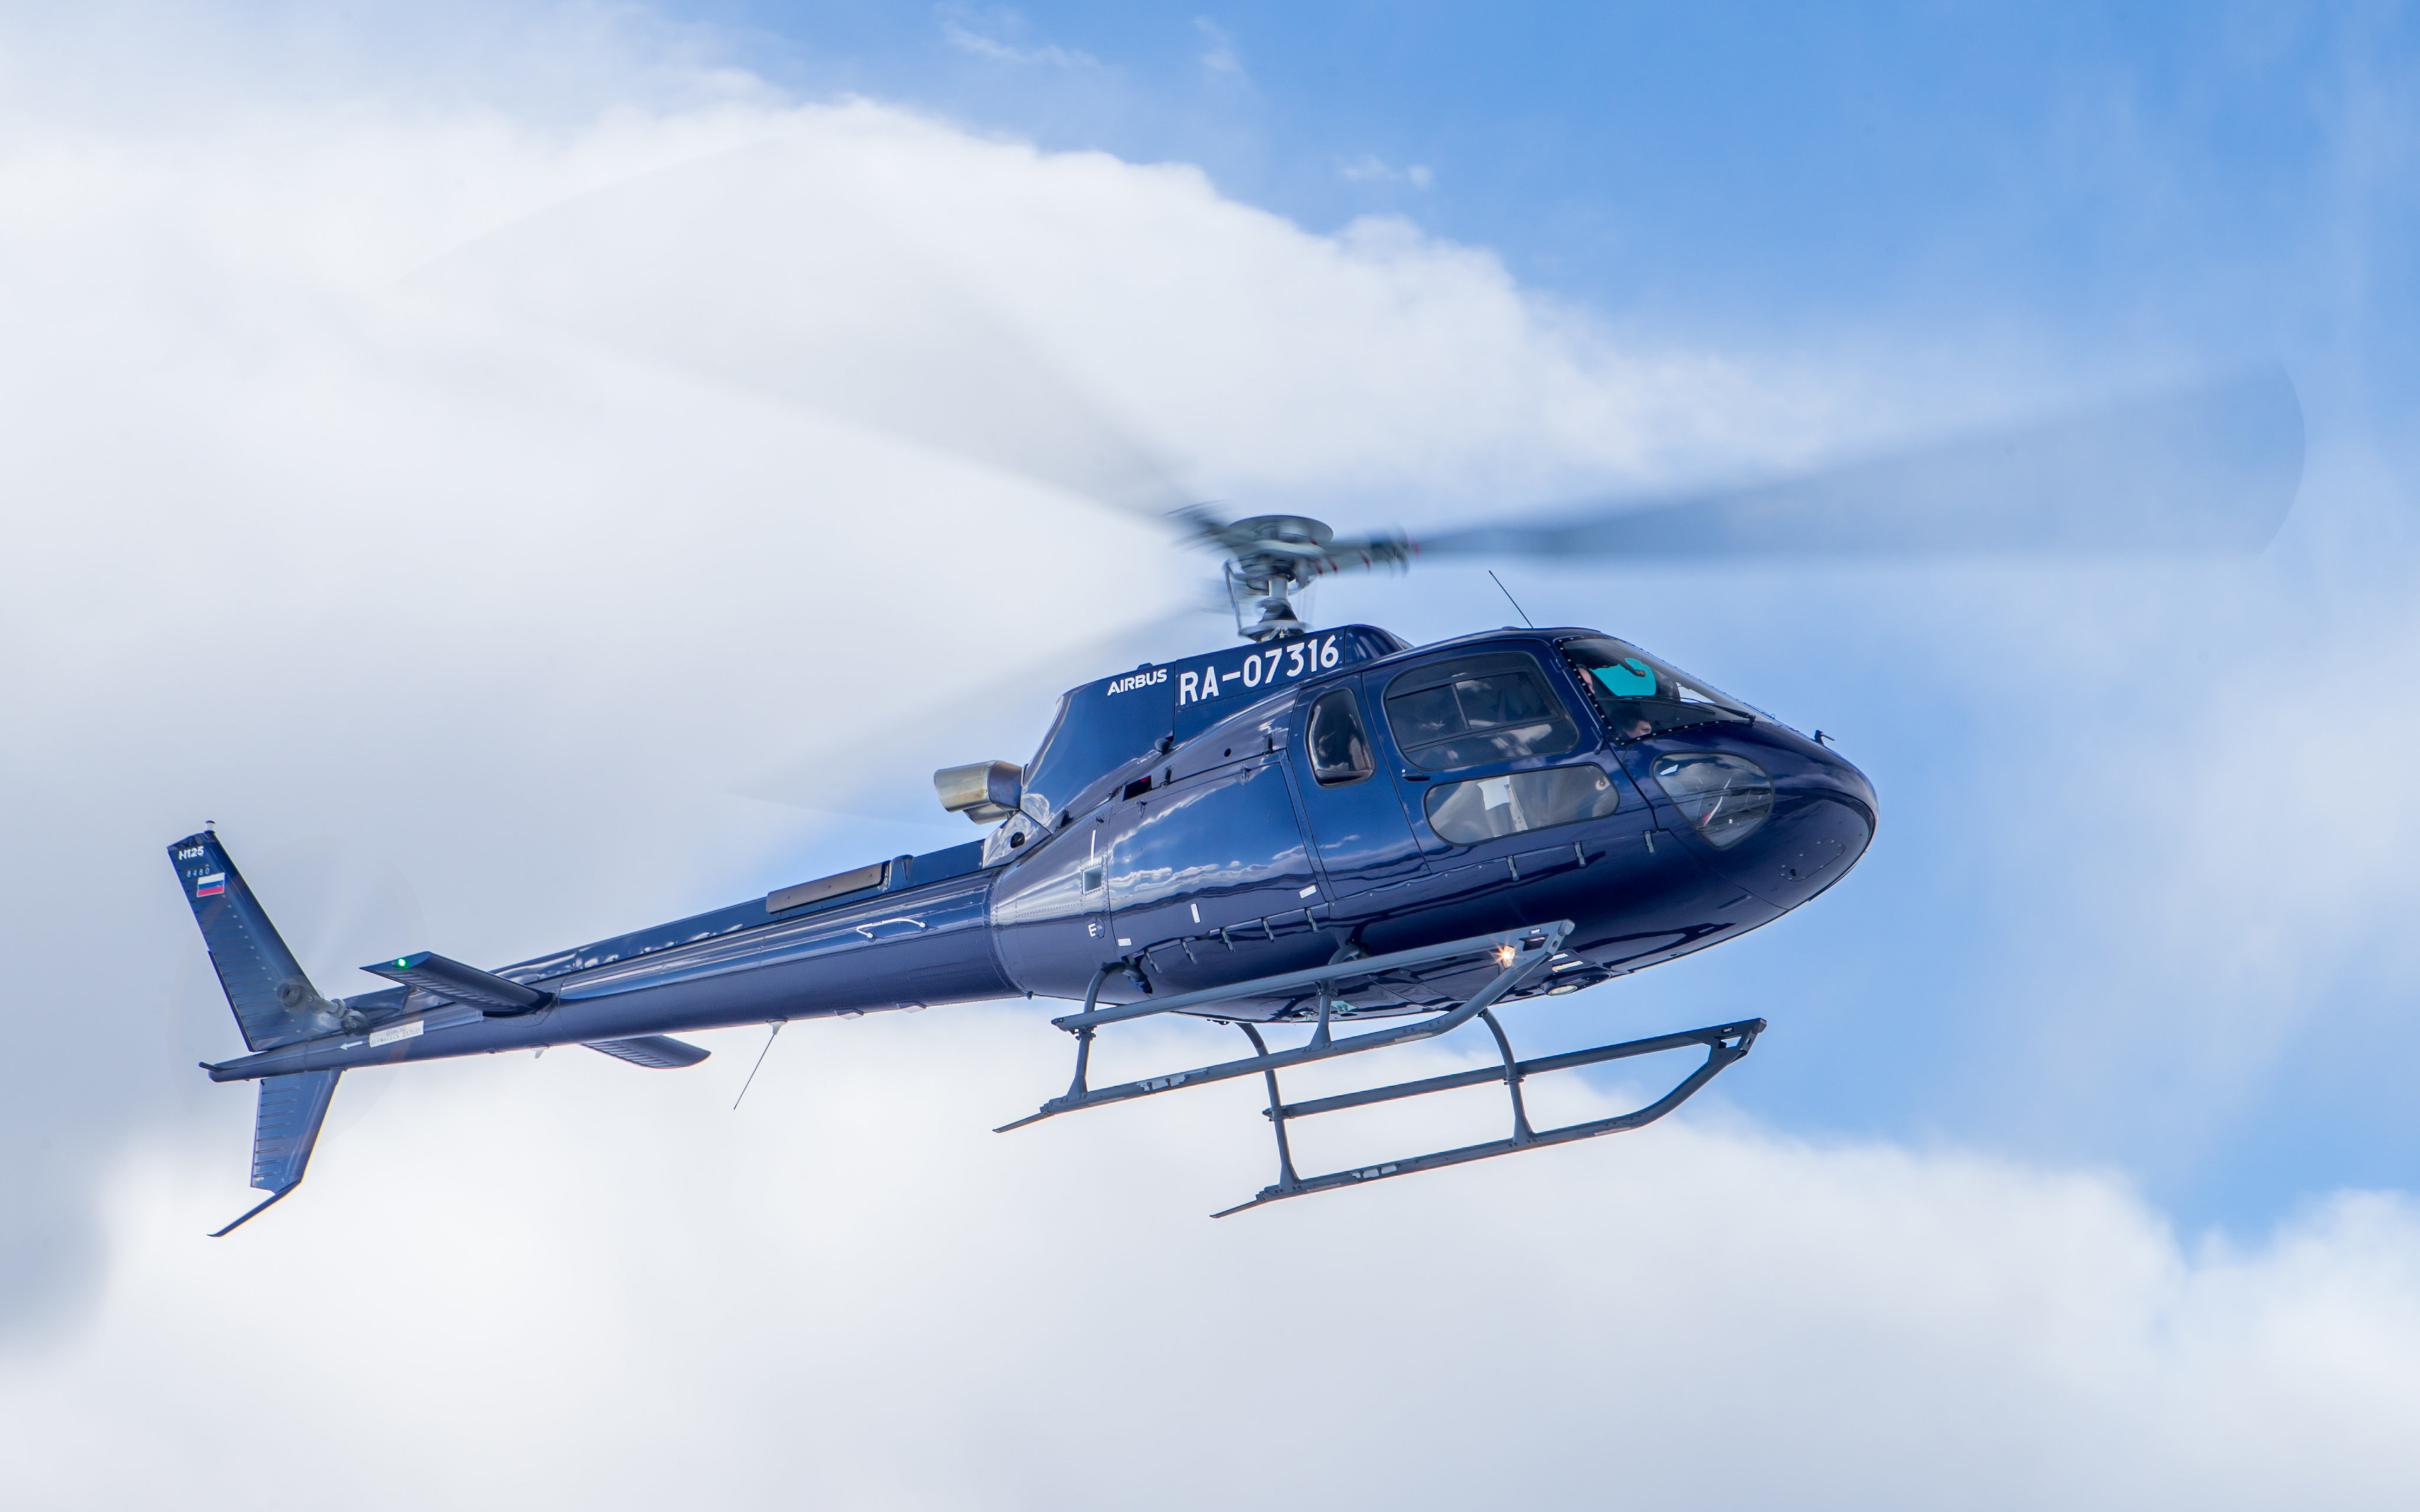 Download Wallpapers 4k Eurocopter As350 Civil Aviation Airbus Helicopters H125 Passenger